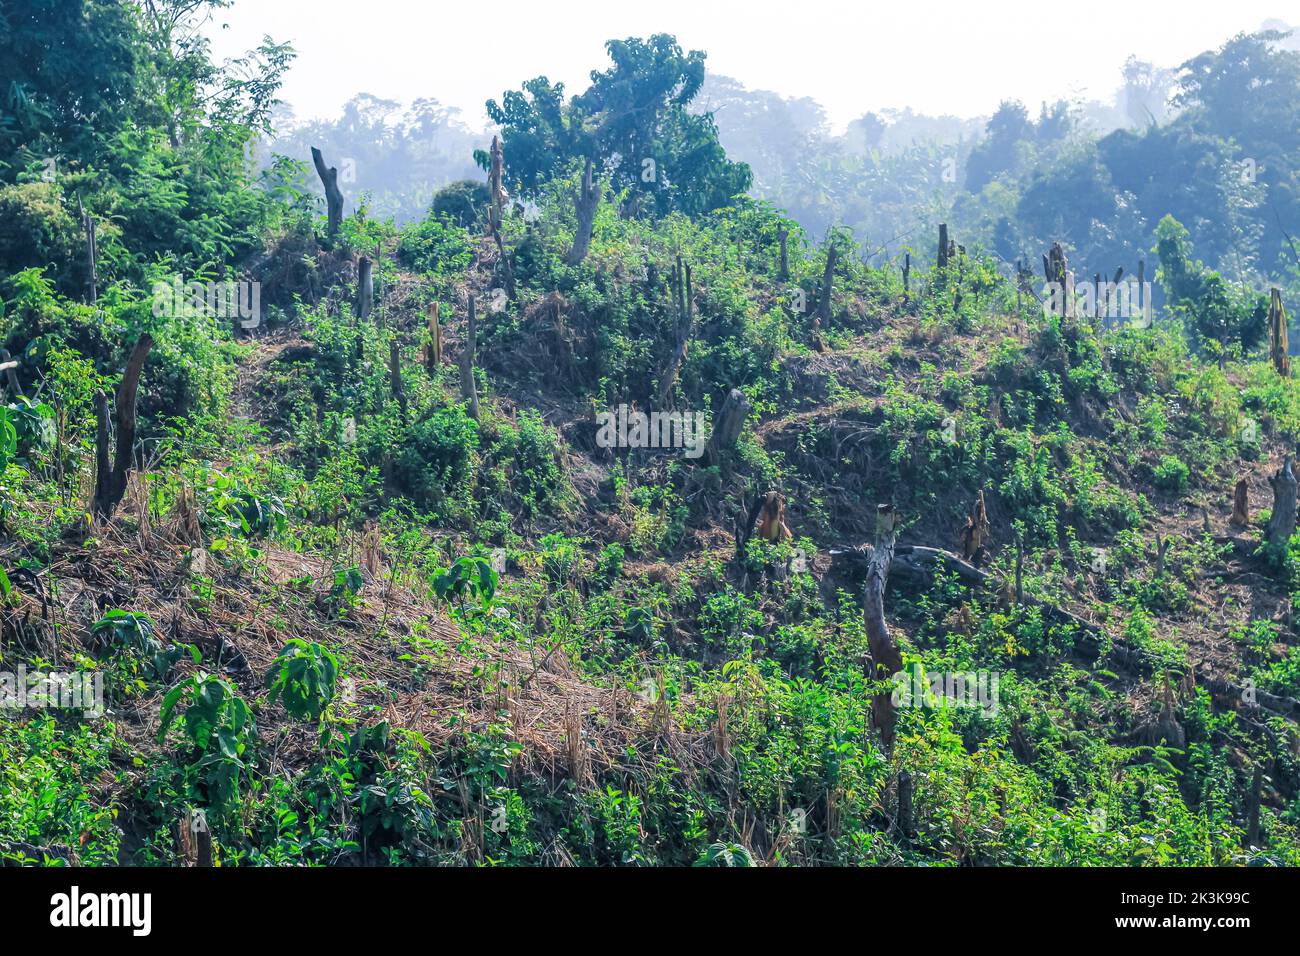 Deforestation environmental problem, rain forests are destroyed for oil palm plantations. Mountains glade trees cut down a forest. Stock Photo